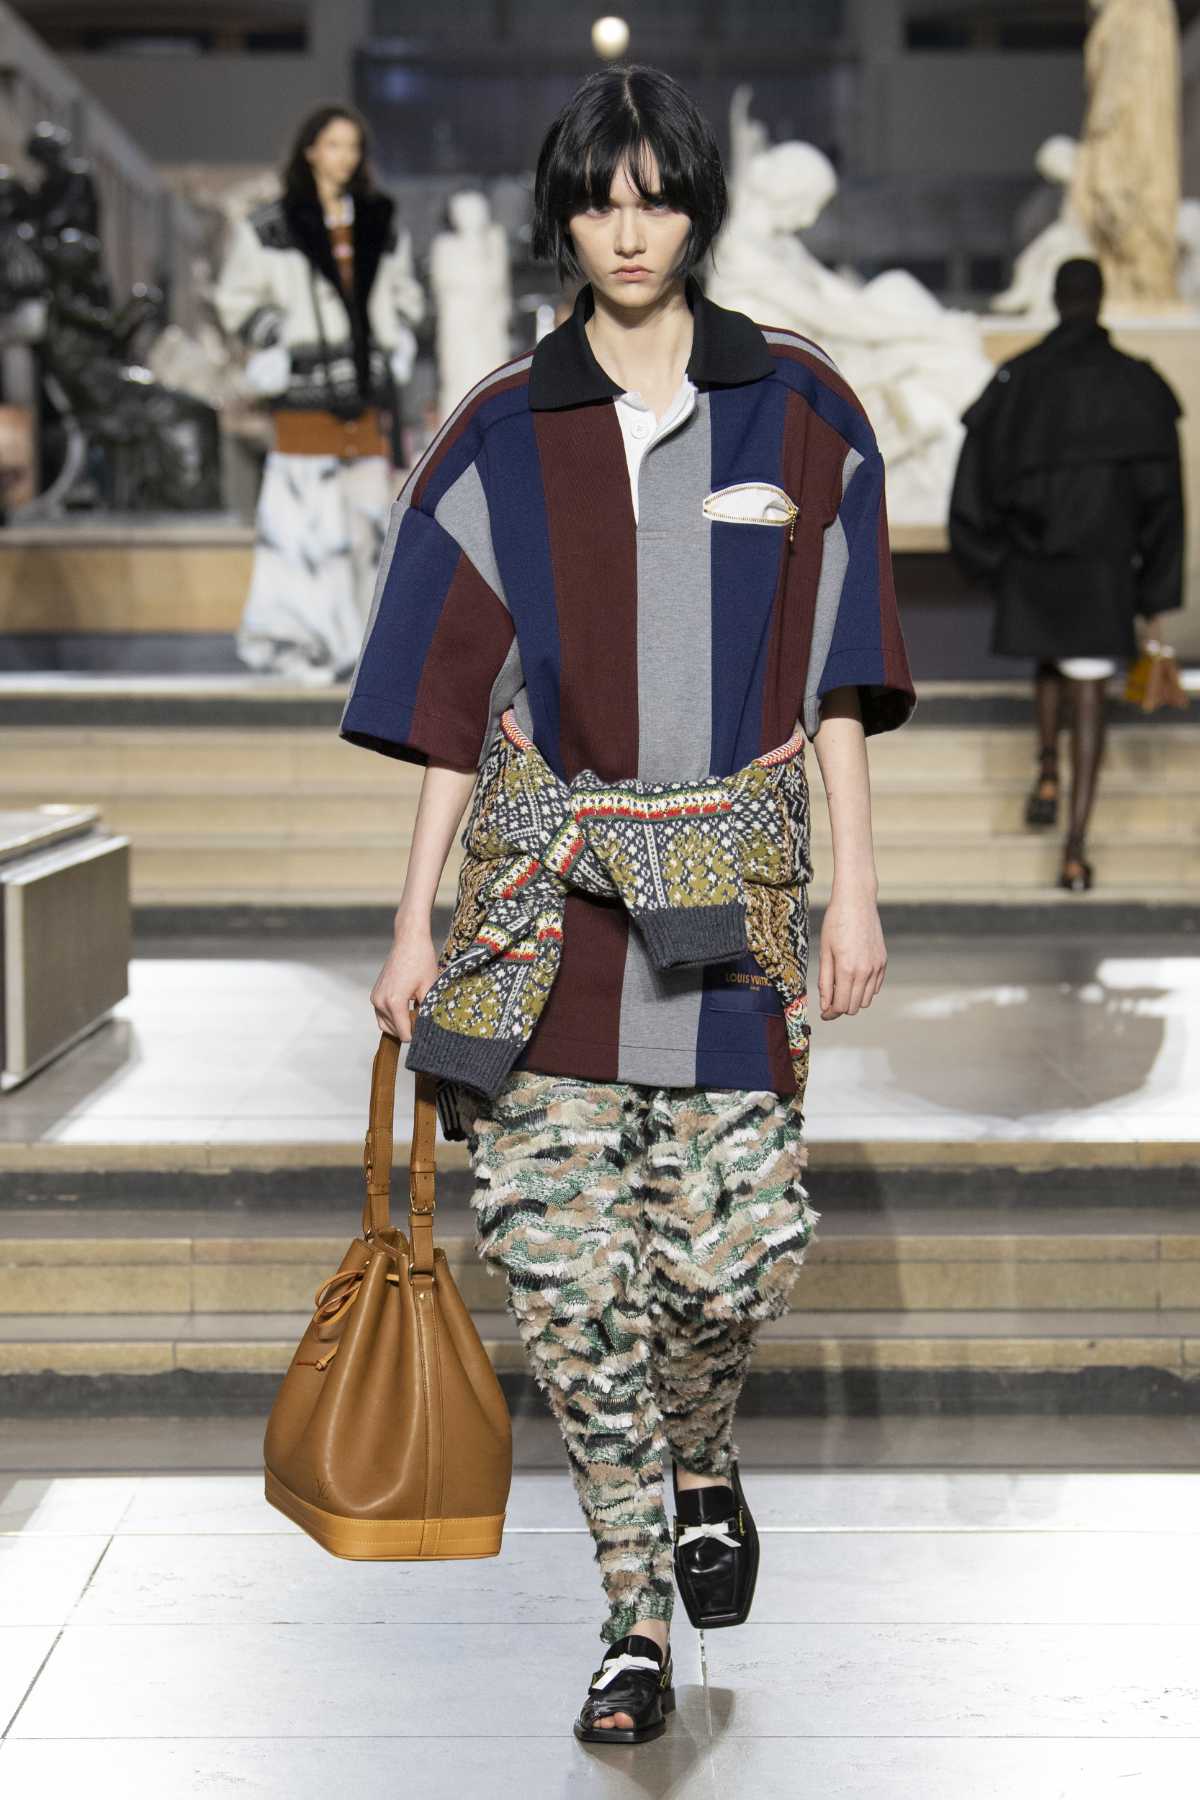 Louis Vuitton Presents Its New Fall-Winter 2022 Women's Fashion Collection